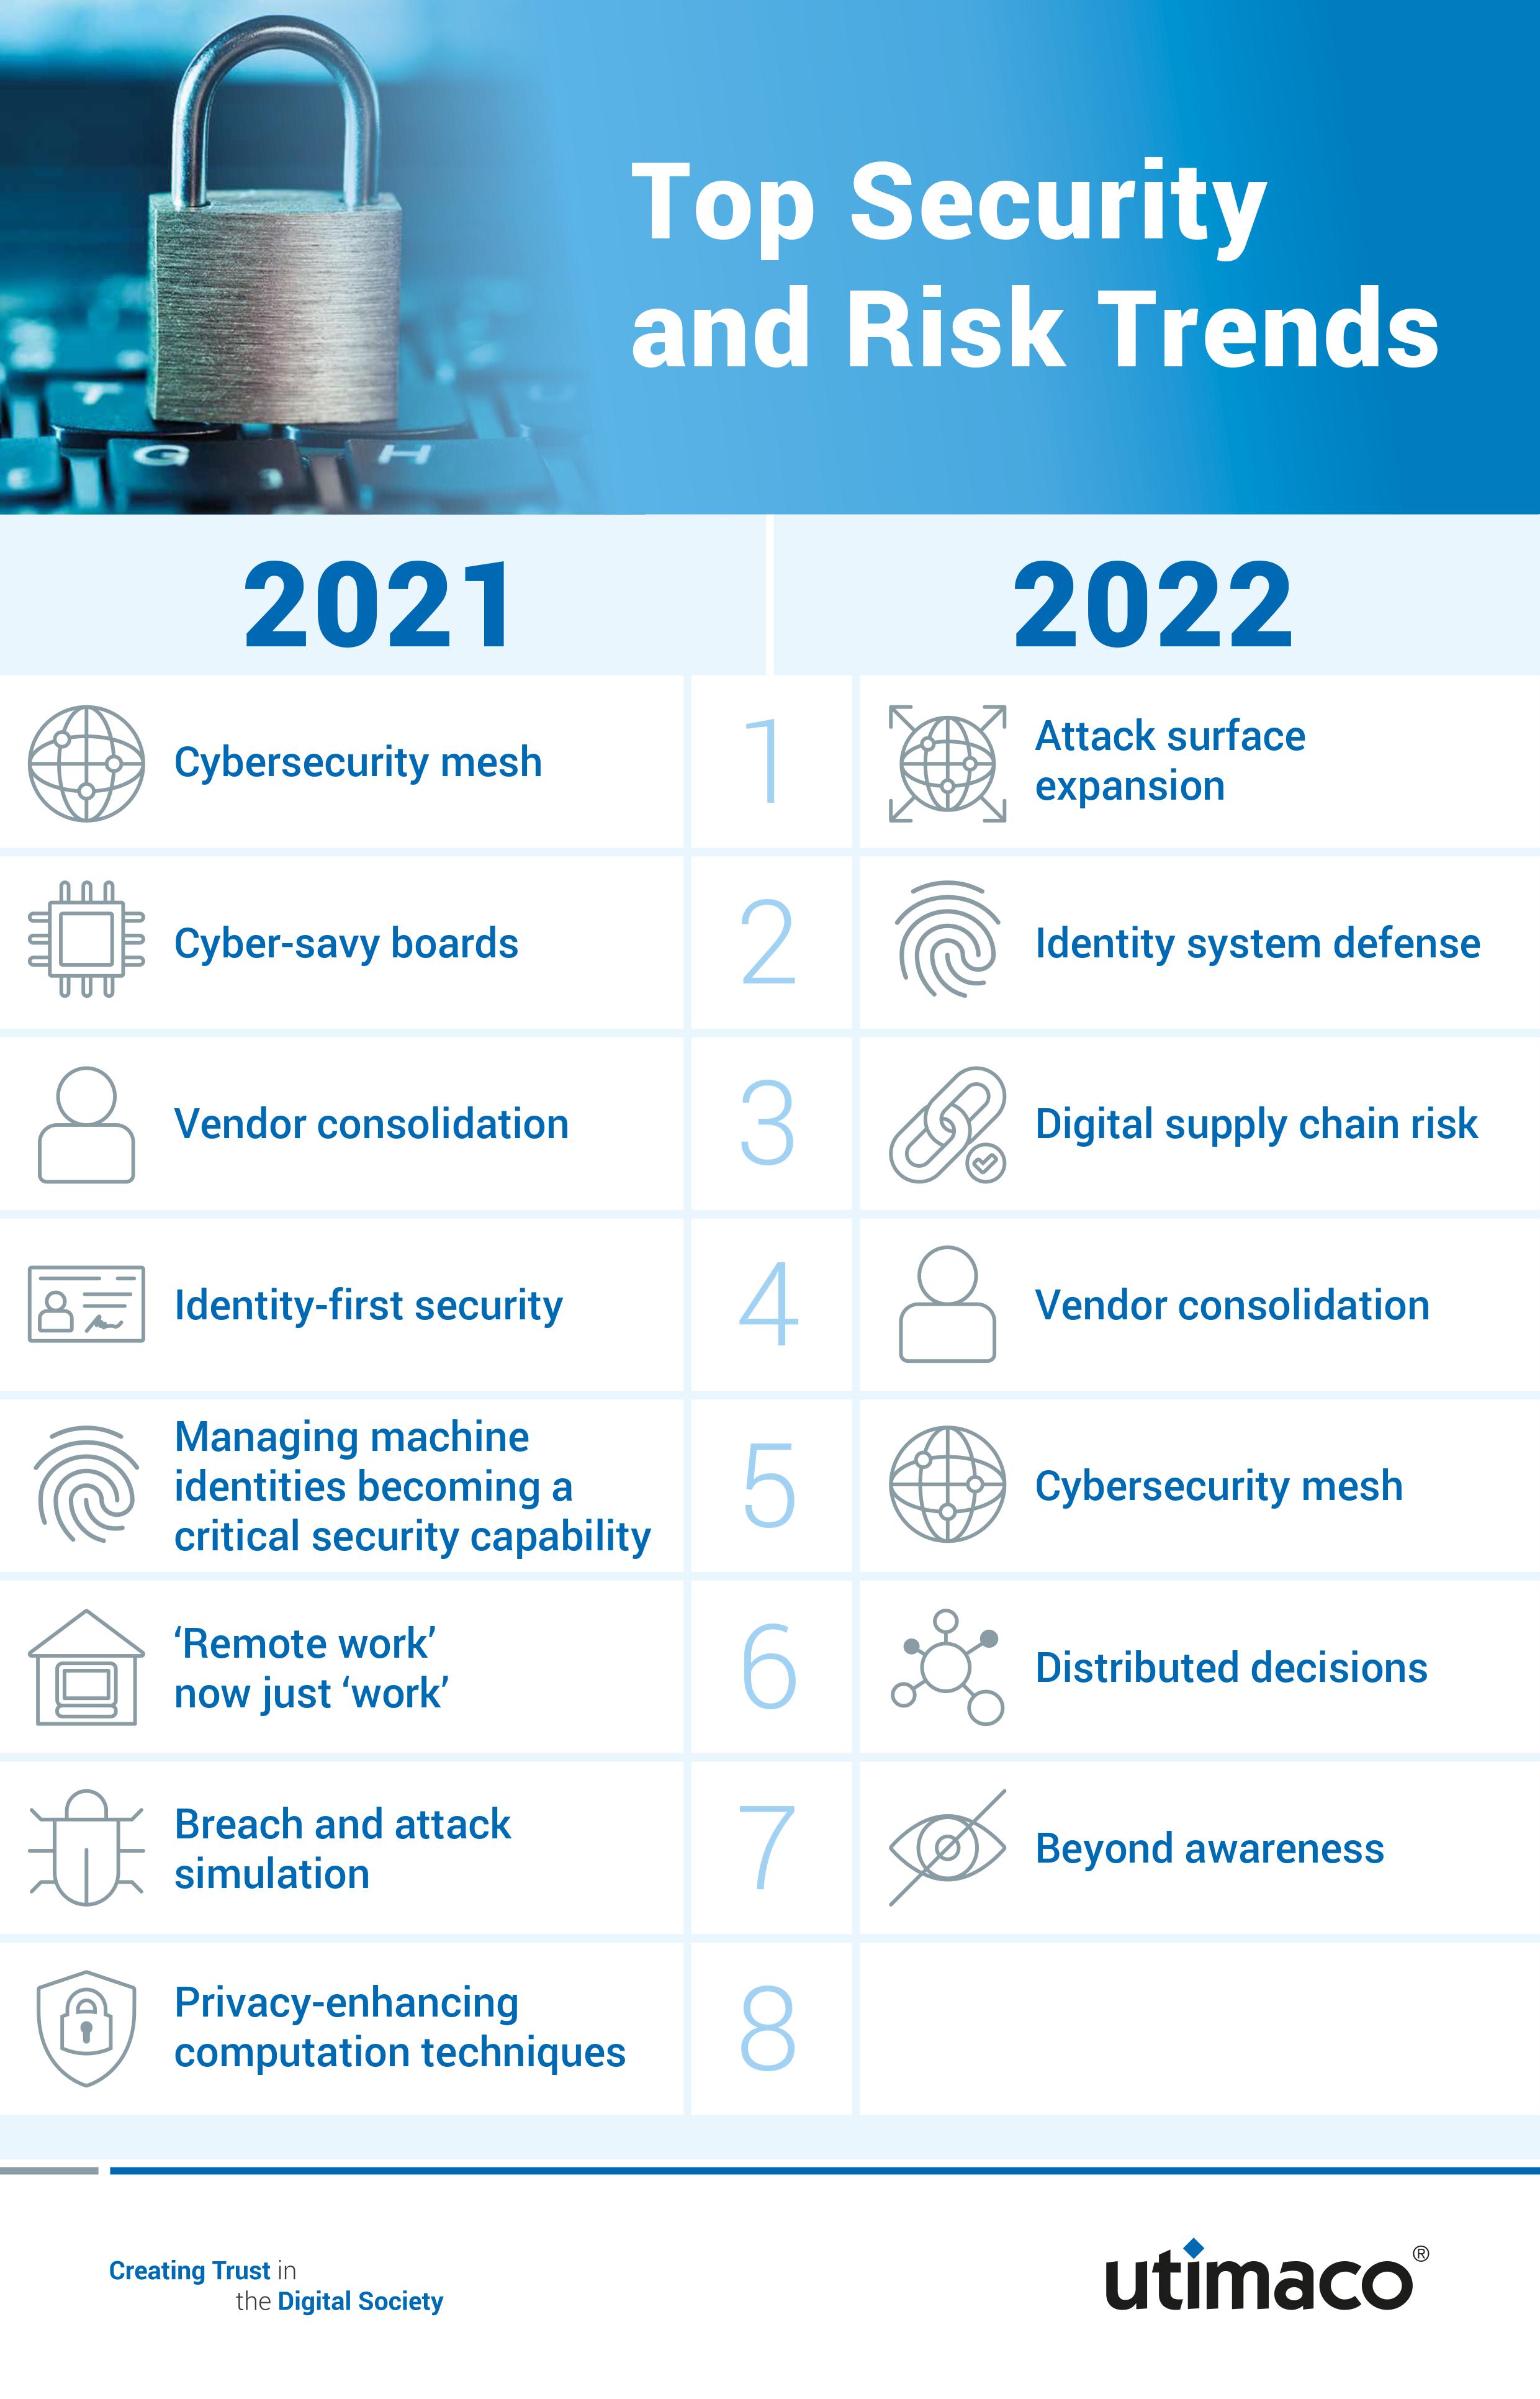 Top Security and Risk Trends 2021 and 2022